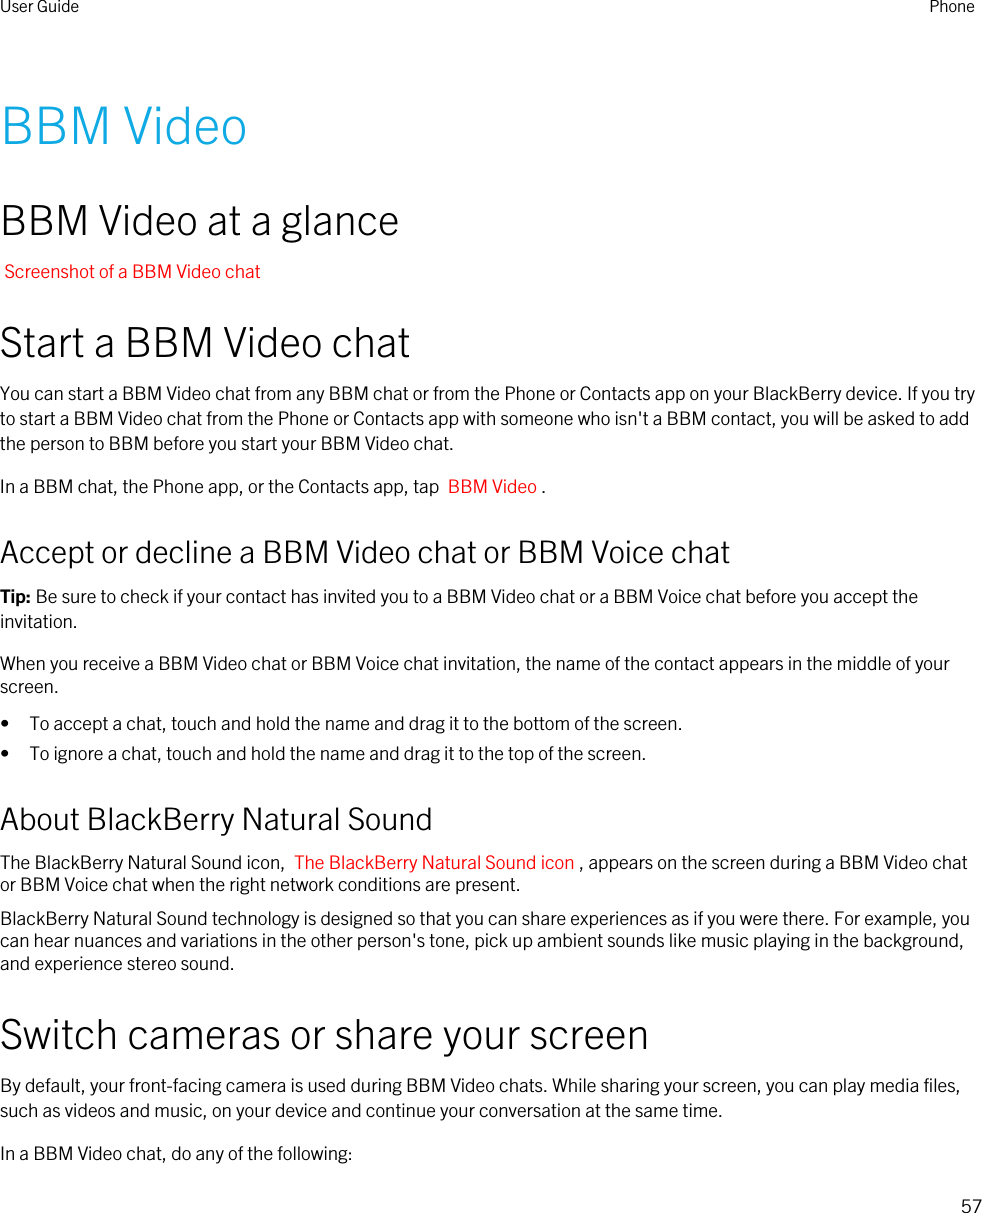 BBM VideoBBM Video at a glanceScreenshot of a BBM Video chatStart a BBM Video chatYou can start a BBM Video chat from any BBM chat or from the Phone or Contacts app on your BlackBerry device. If you try to start a BBM Video chat from the Phone or Contacts app with someone who isn&apos;t a BBM contact, you will be asked to add the person to BBM before you start your BBM Video chat.In a BBM chat, the Phone app, or the Contacts app, tap  BBM Video .Accept or decline a BBM Video chat or BBM Voice chatTip: Be sure to check if your contact has invited you to a BBM Video chat or a BBM Voice chat before you accept the invitation.When you receive a BBM Video chat or BBM Voice chat invitation, the name of the contact appears in the middle of your screen.• To accept a chat, touch and hold the name and drag it to the bottom of the screen.• To ignore a chat, touch and hold the name and drag it to the top of the screen.About BlackBerry Natural SoundThe BlackBerry Natural Sound icon,  The BlackBerry Natural Sound icon , appears on the screen during a BBM Video chat or BBM Voice chat when the right network conditions are present.BlackBerry Natural Sound technology is designed so that you can share experiences as if you were there. For example, you can hear nuances and variations in the other person&apos;s tone, pick up ambient sounds like music playing in the background, and experience stereo sound.Switch cameras or share your screenBy default, your front-facing camera is used during BBM Video chats. While sharing your screen, you can play media files, such as videos and music, on your device and continue your conversation at the same time.In a BBM Video chat, do any of the following:User Guide Phone57